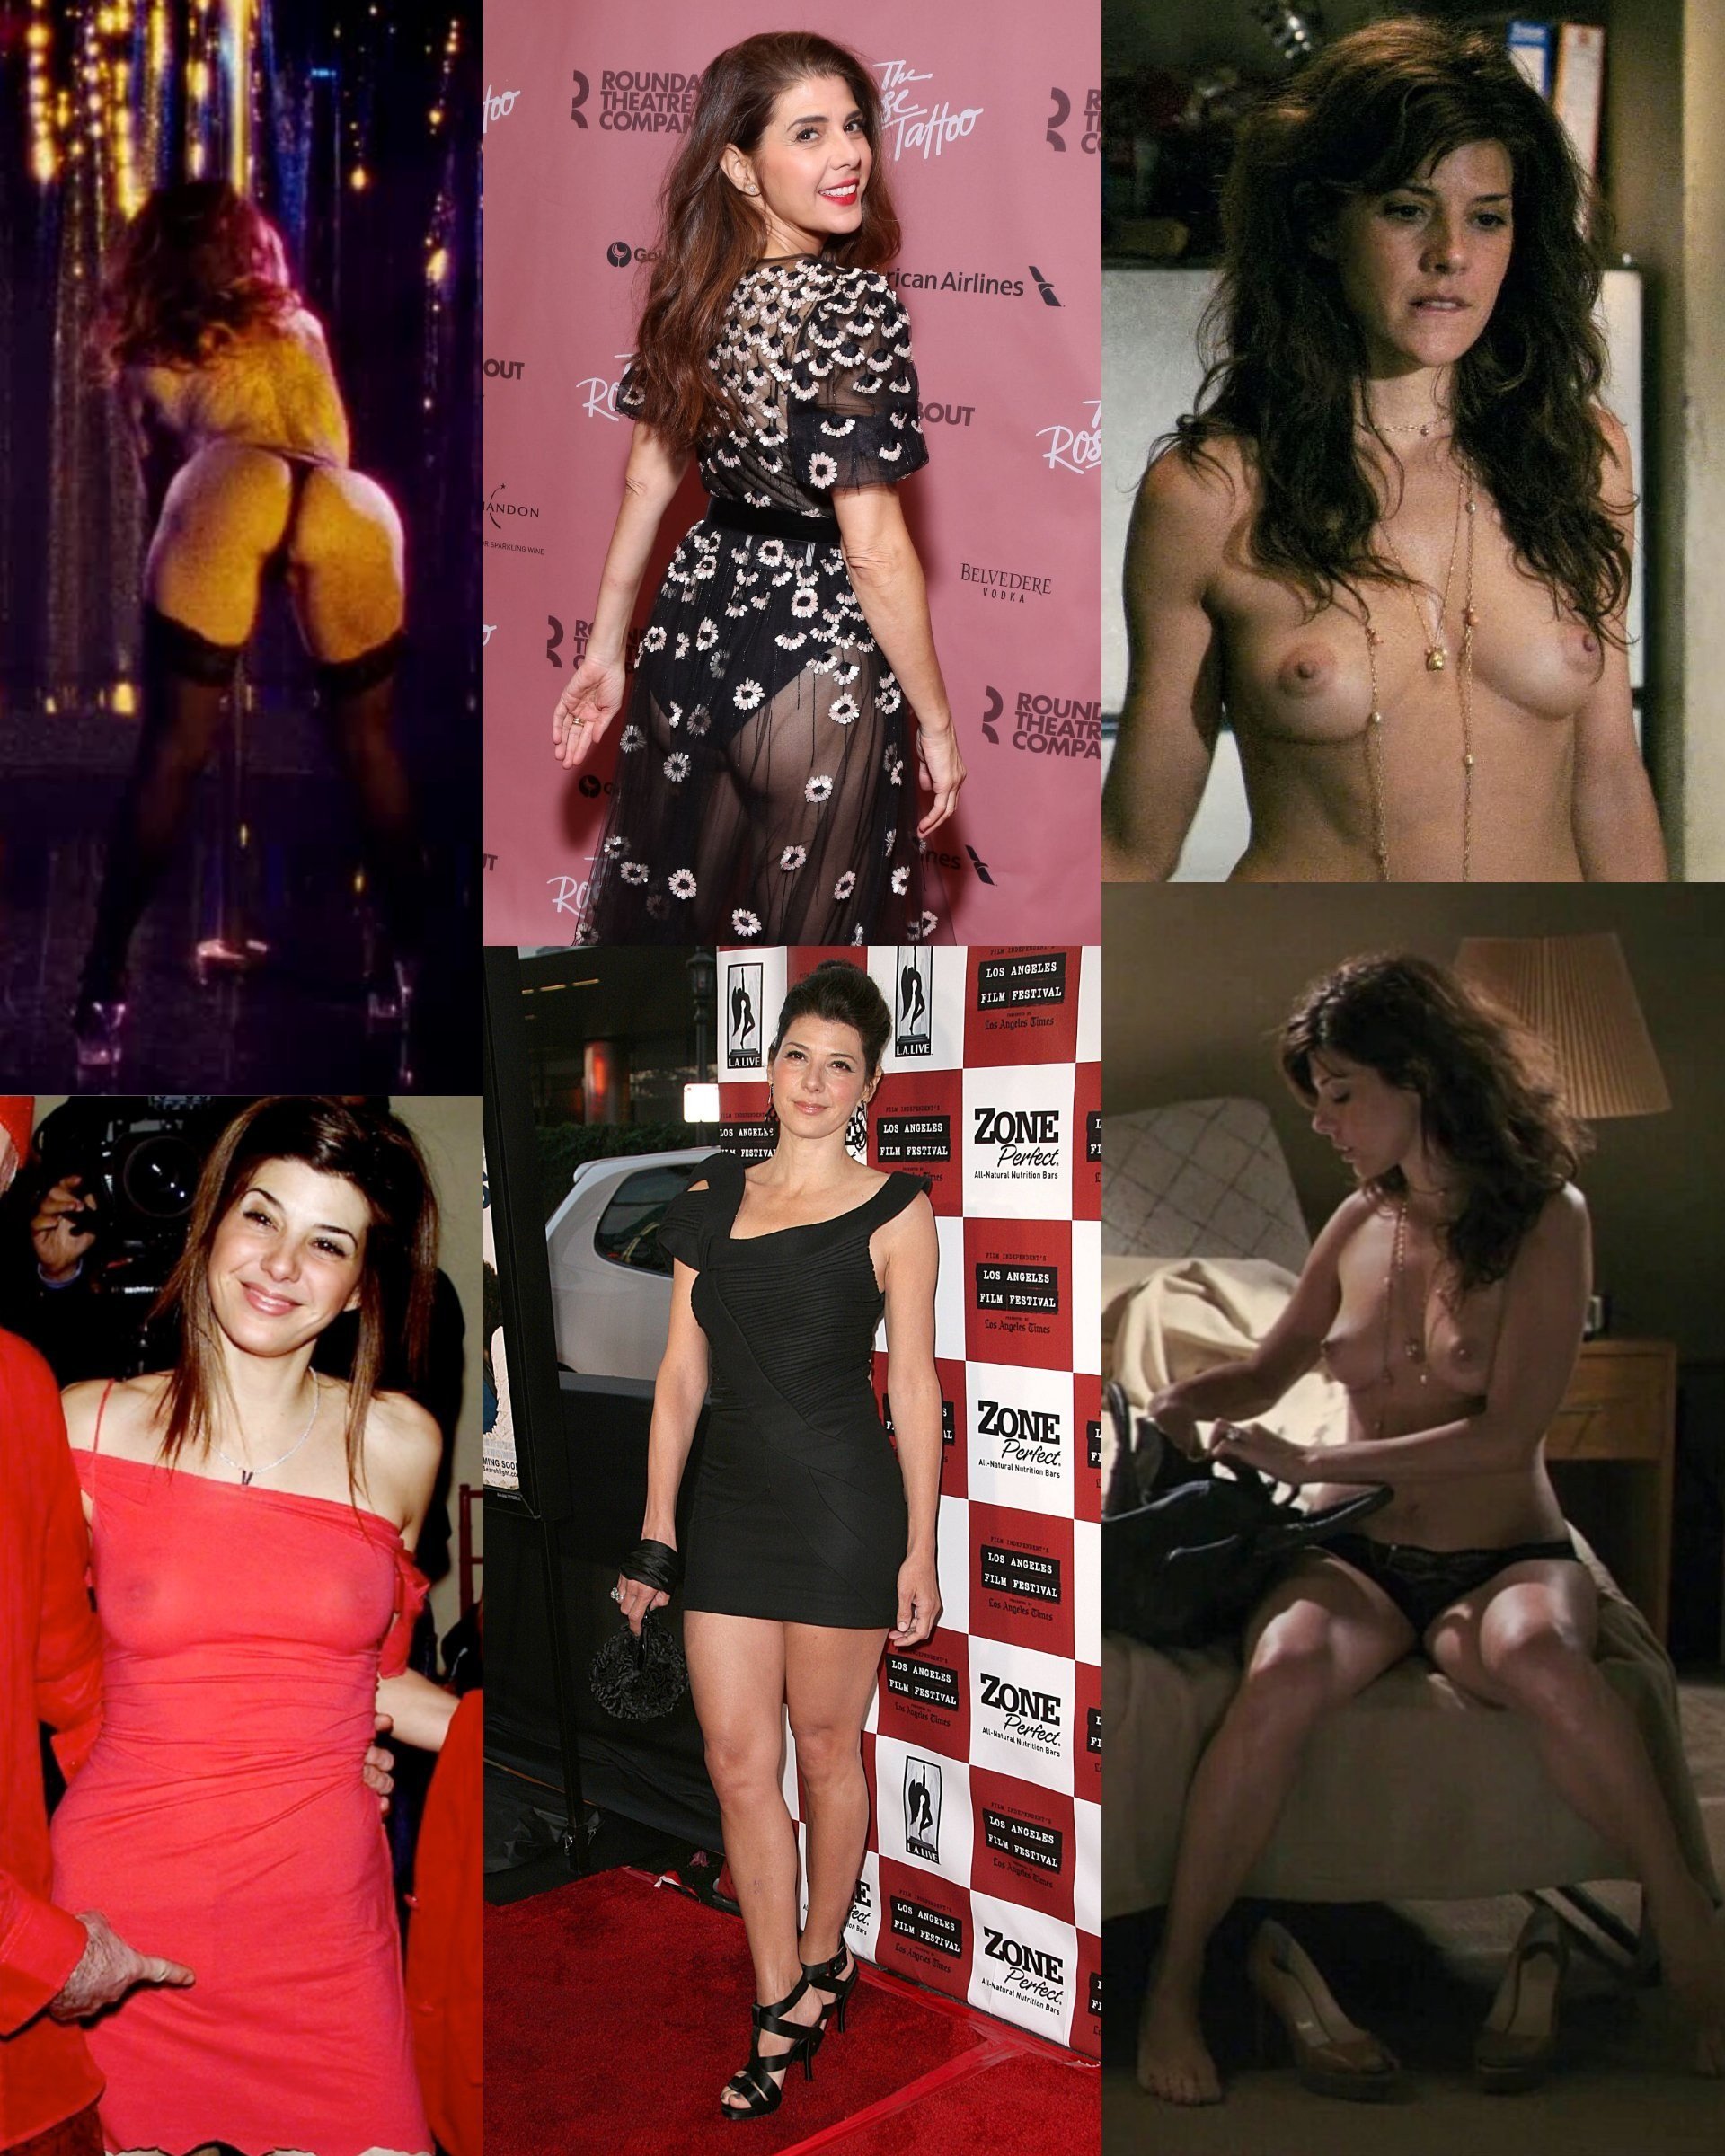 Best of Marissa tomei naked pics